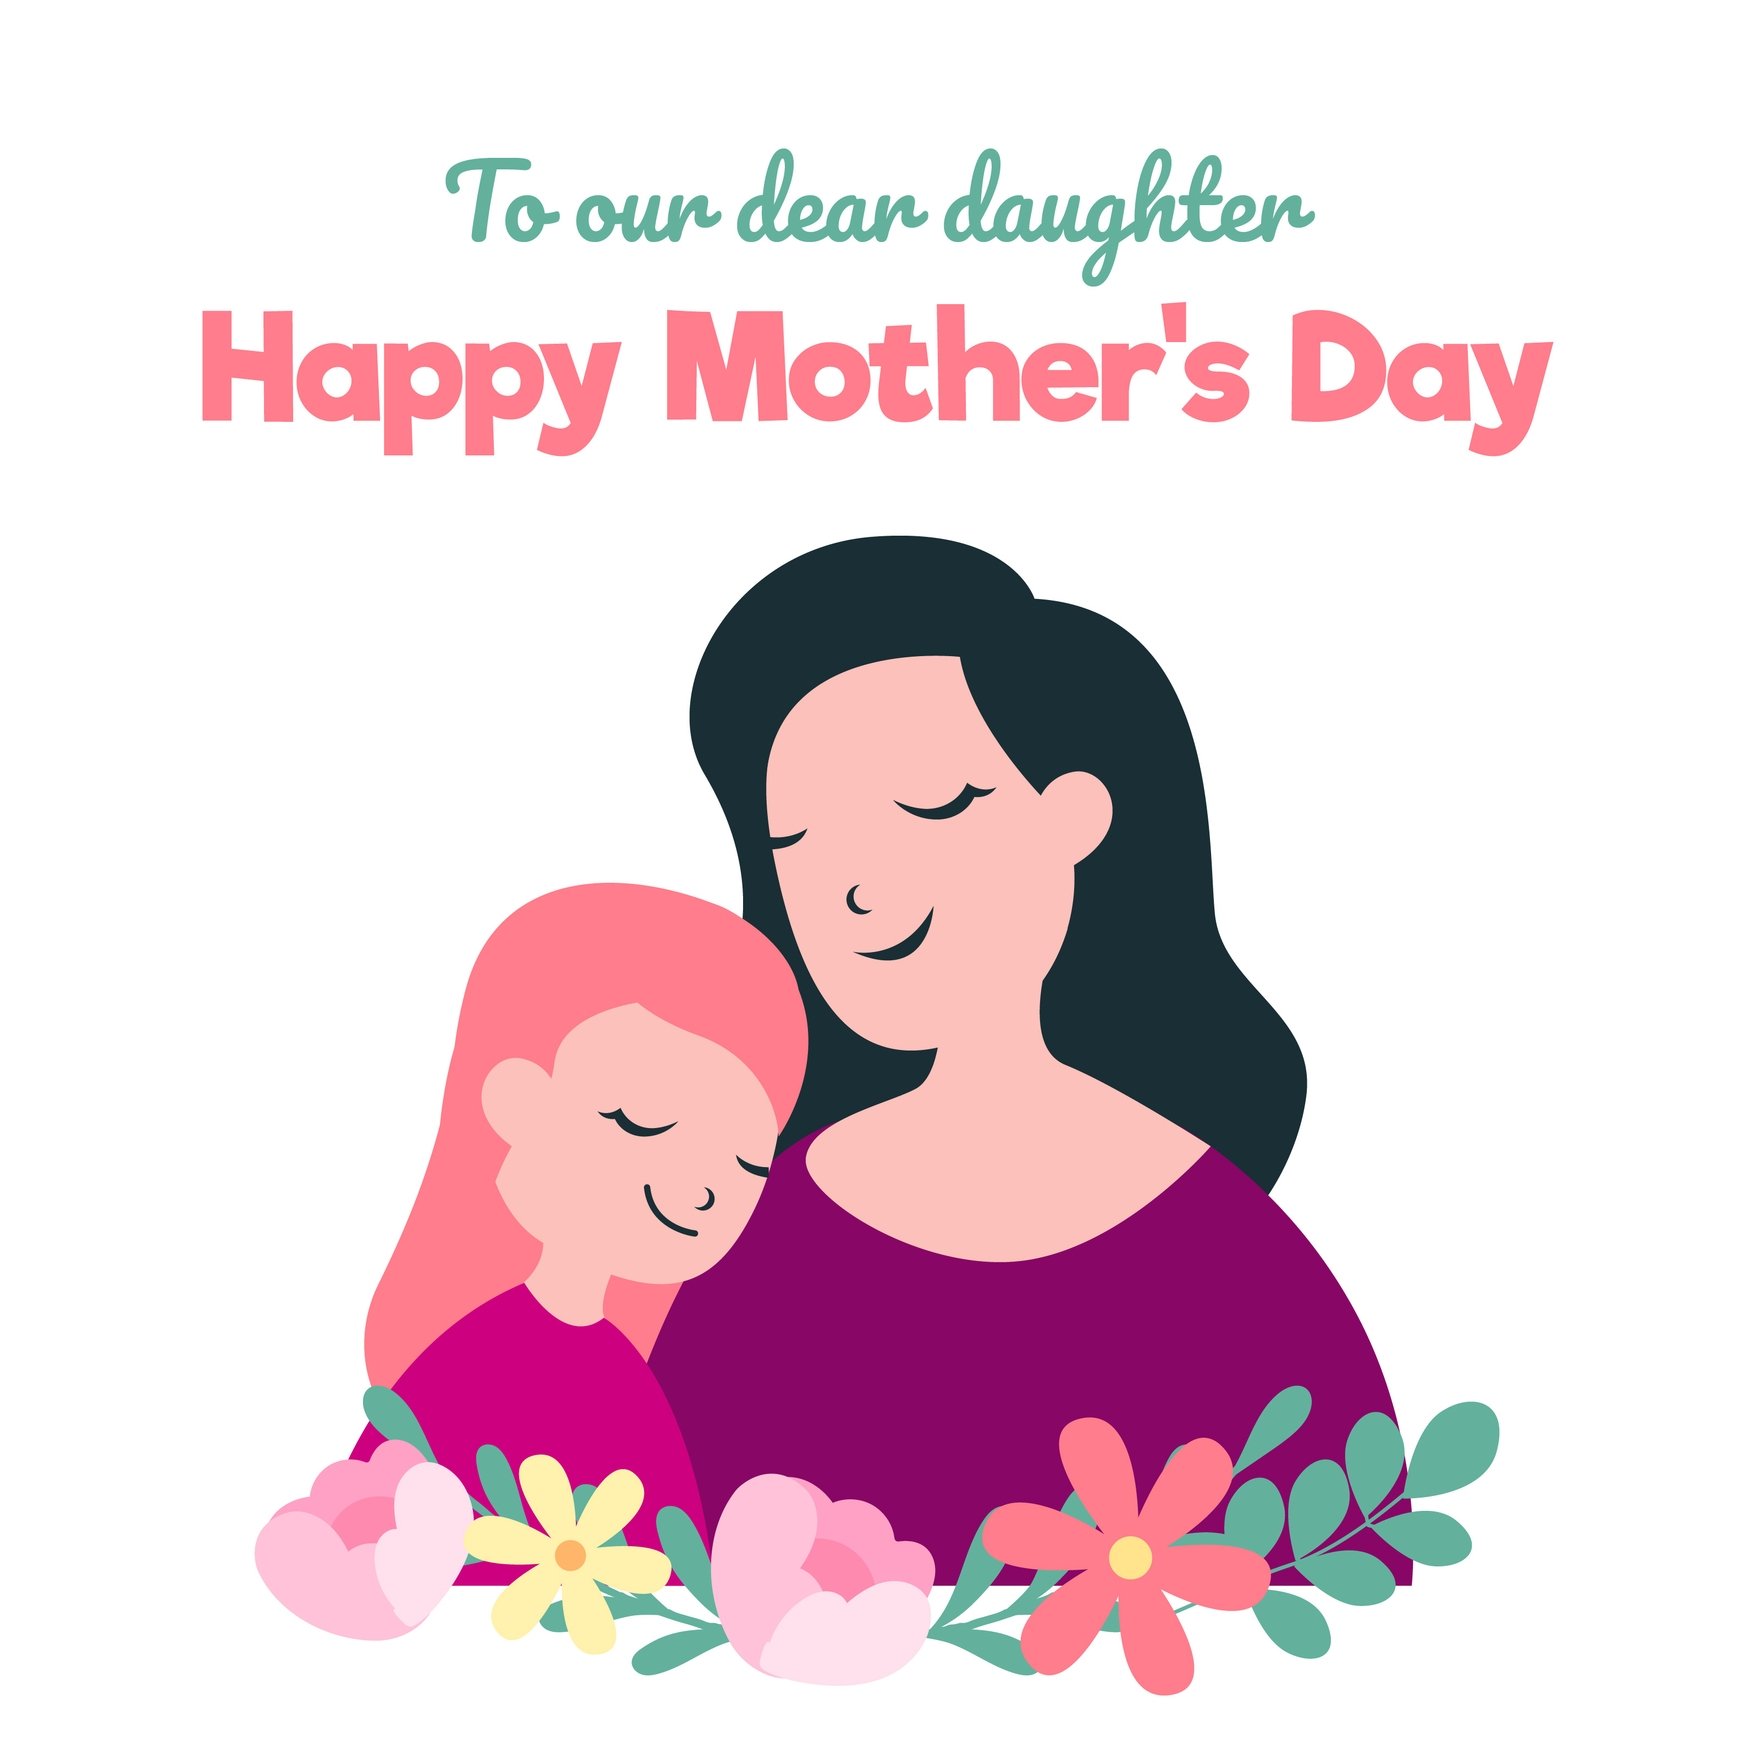 Mother's Day Stickers for Facebook on Behance | Happy mom day, Happy  mother's day card, Happy mother day quotes